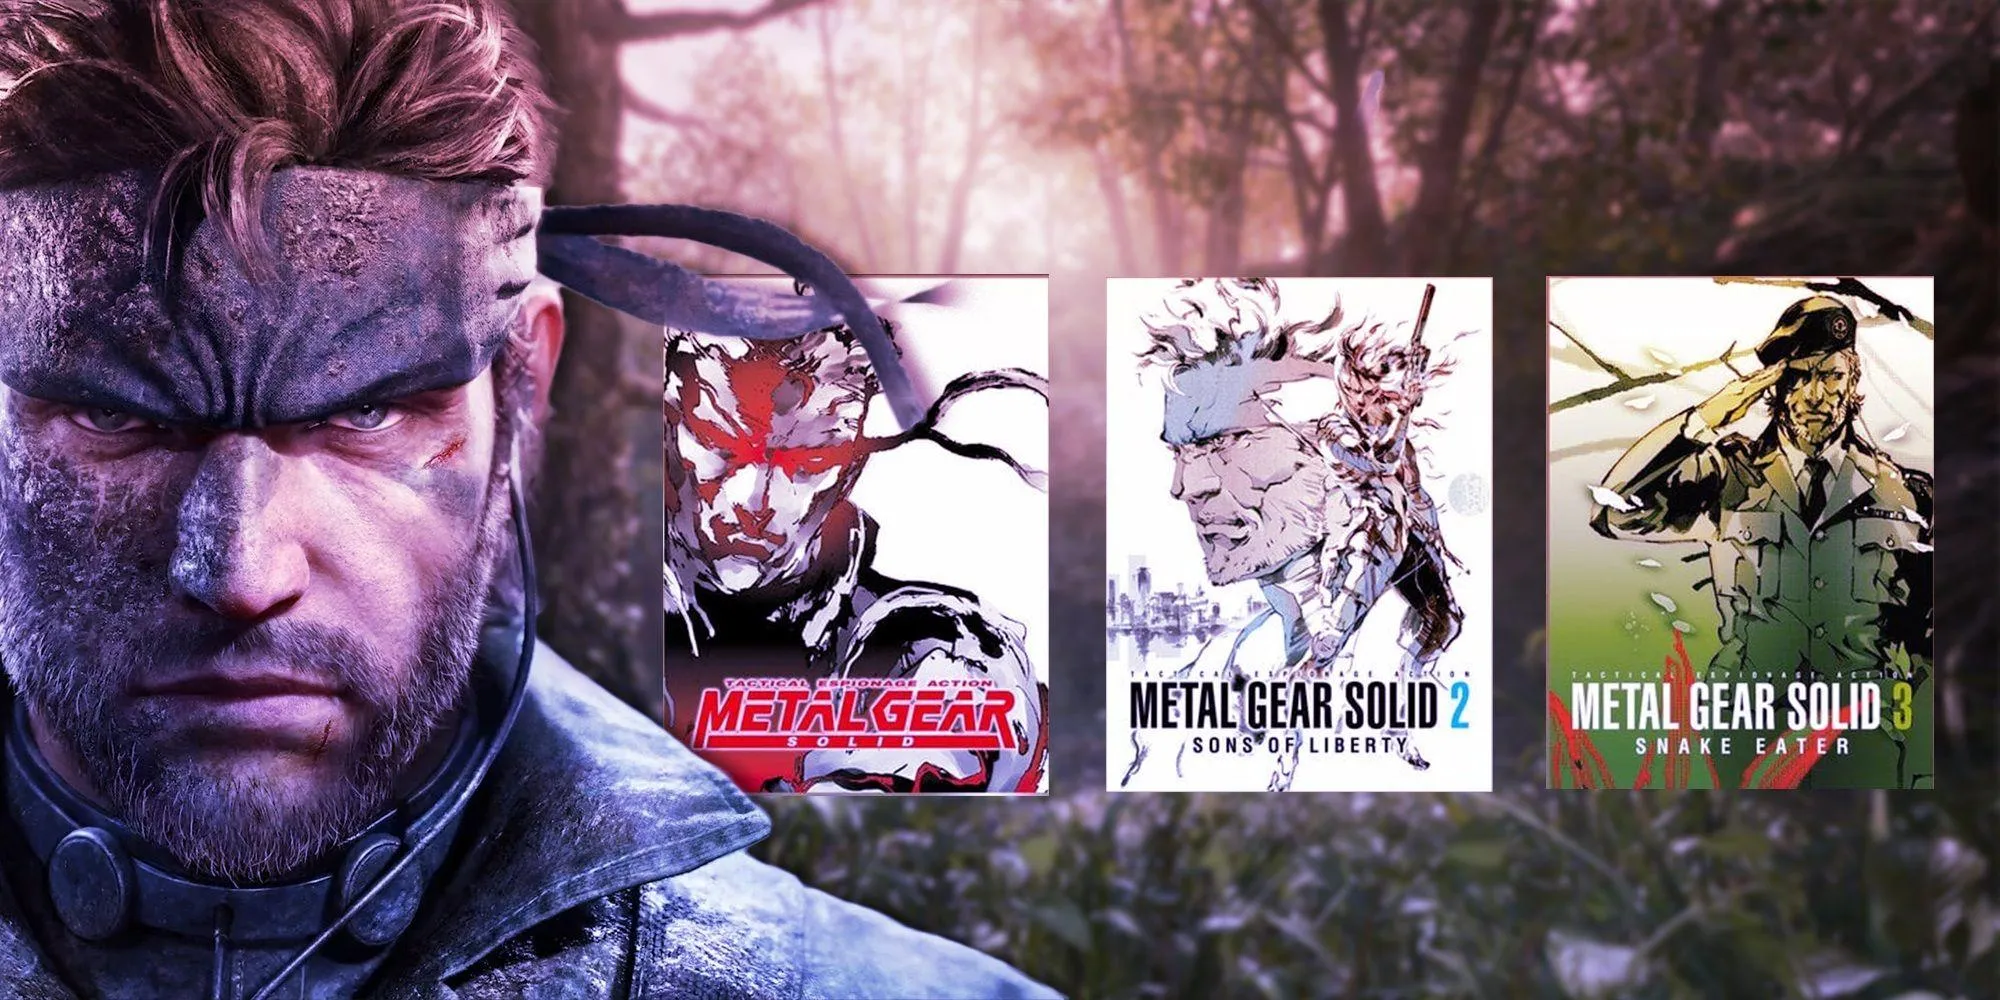 Mgs 3 master collection. Metal Gear Snake Eater Remake. Metal Gear Solid Master collection. Metal Gear Solid 3 ремейк. Metal Gear Solid Дельта.